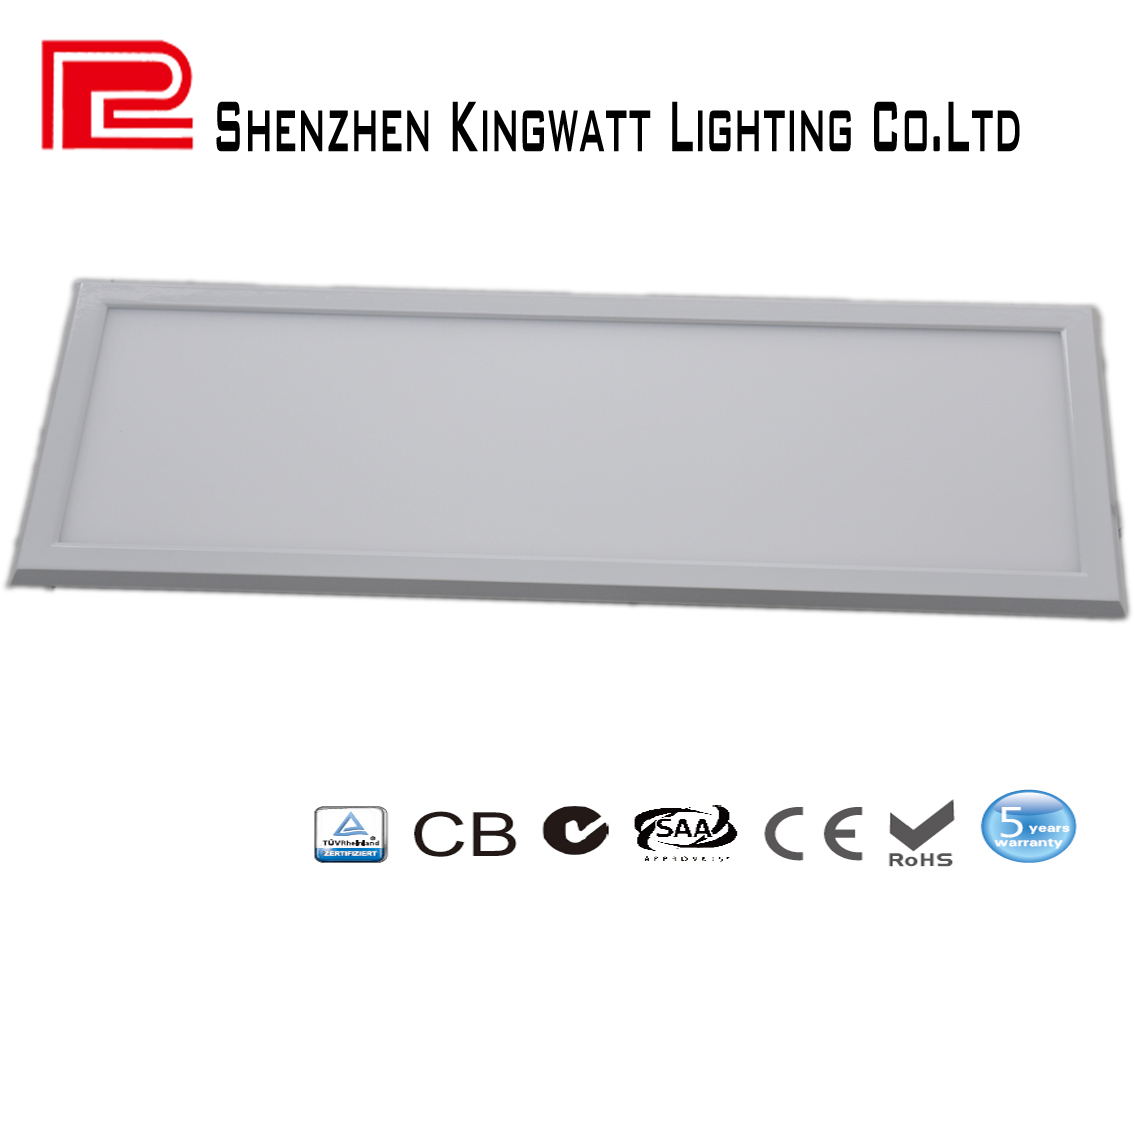 CB/CTEL/SAA/RoHS 100Lm/W LED Panel Light，300mm*1200mm with 36W 